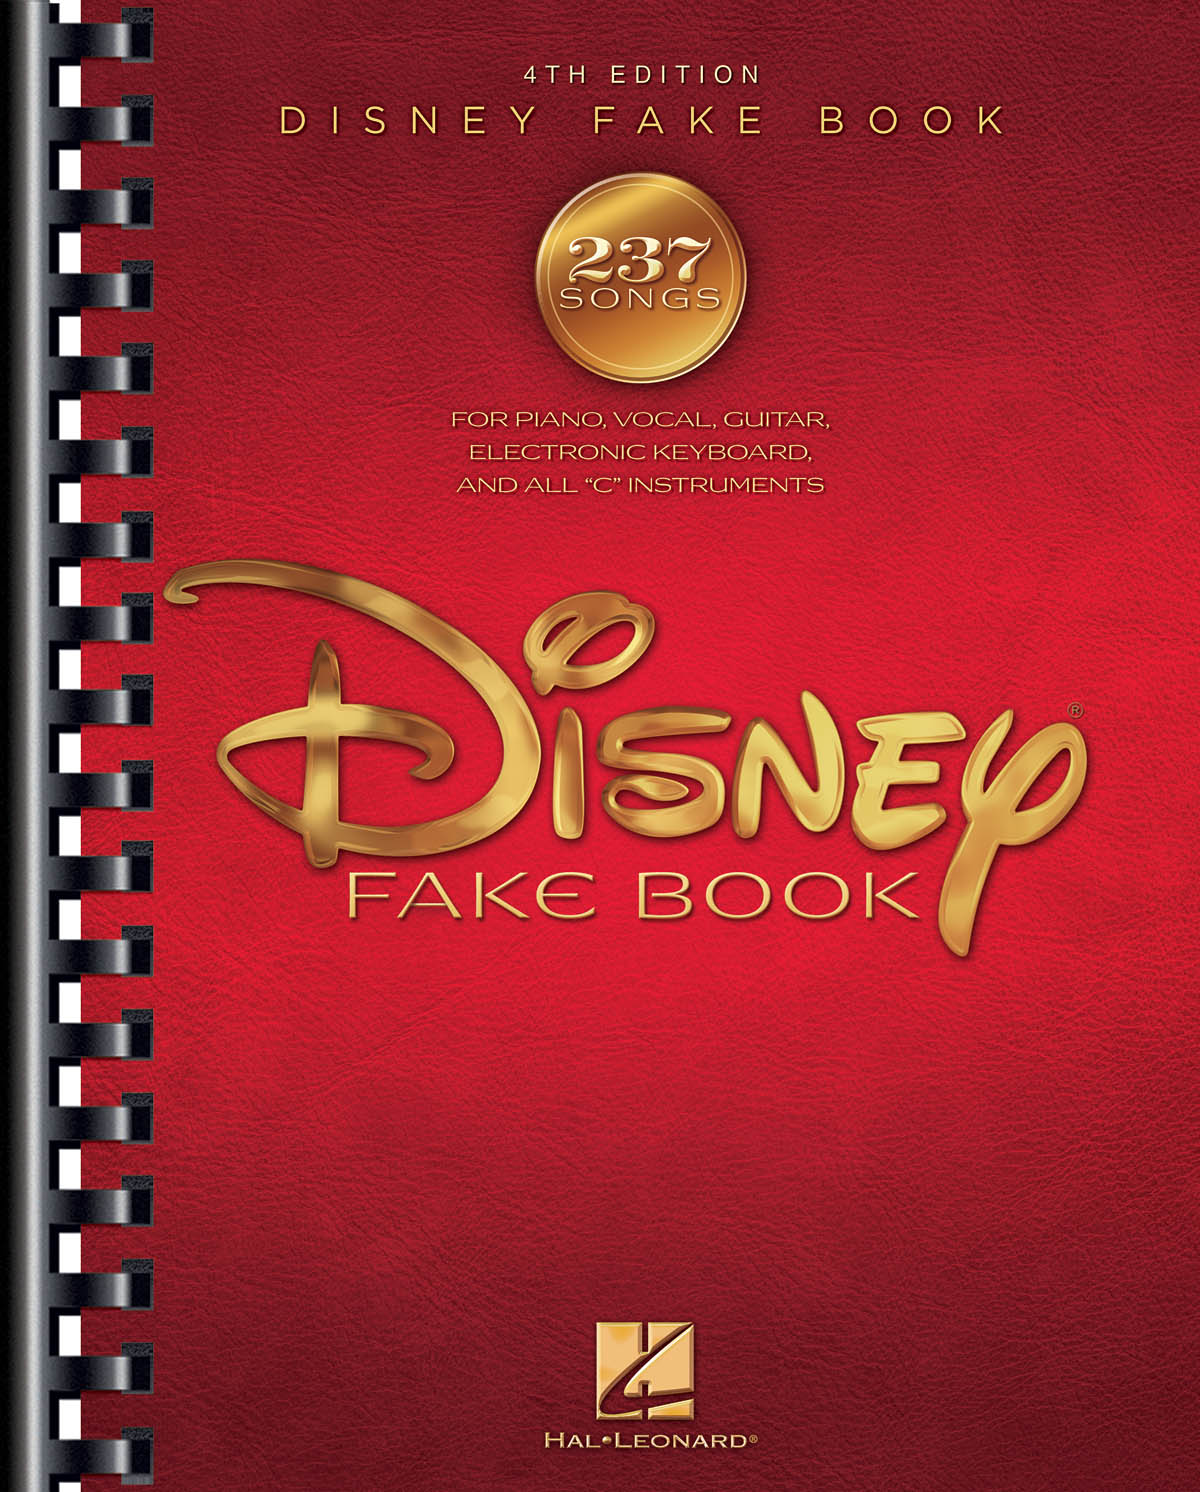 The Disney Fake Book - 4th Edition - PVG, Keyboard and all C Instruments